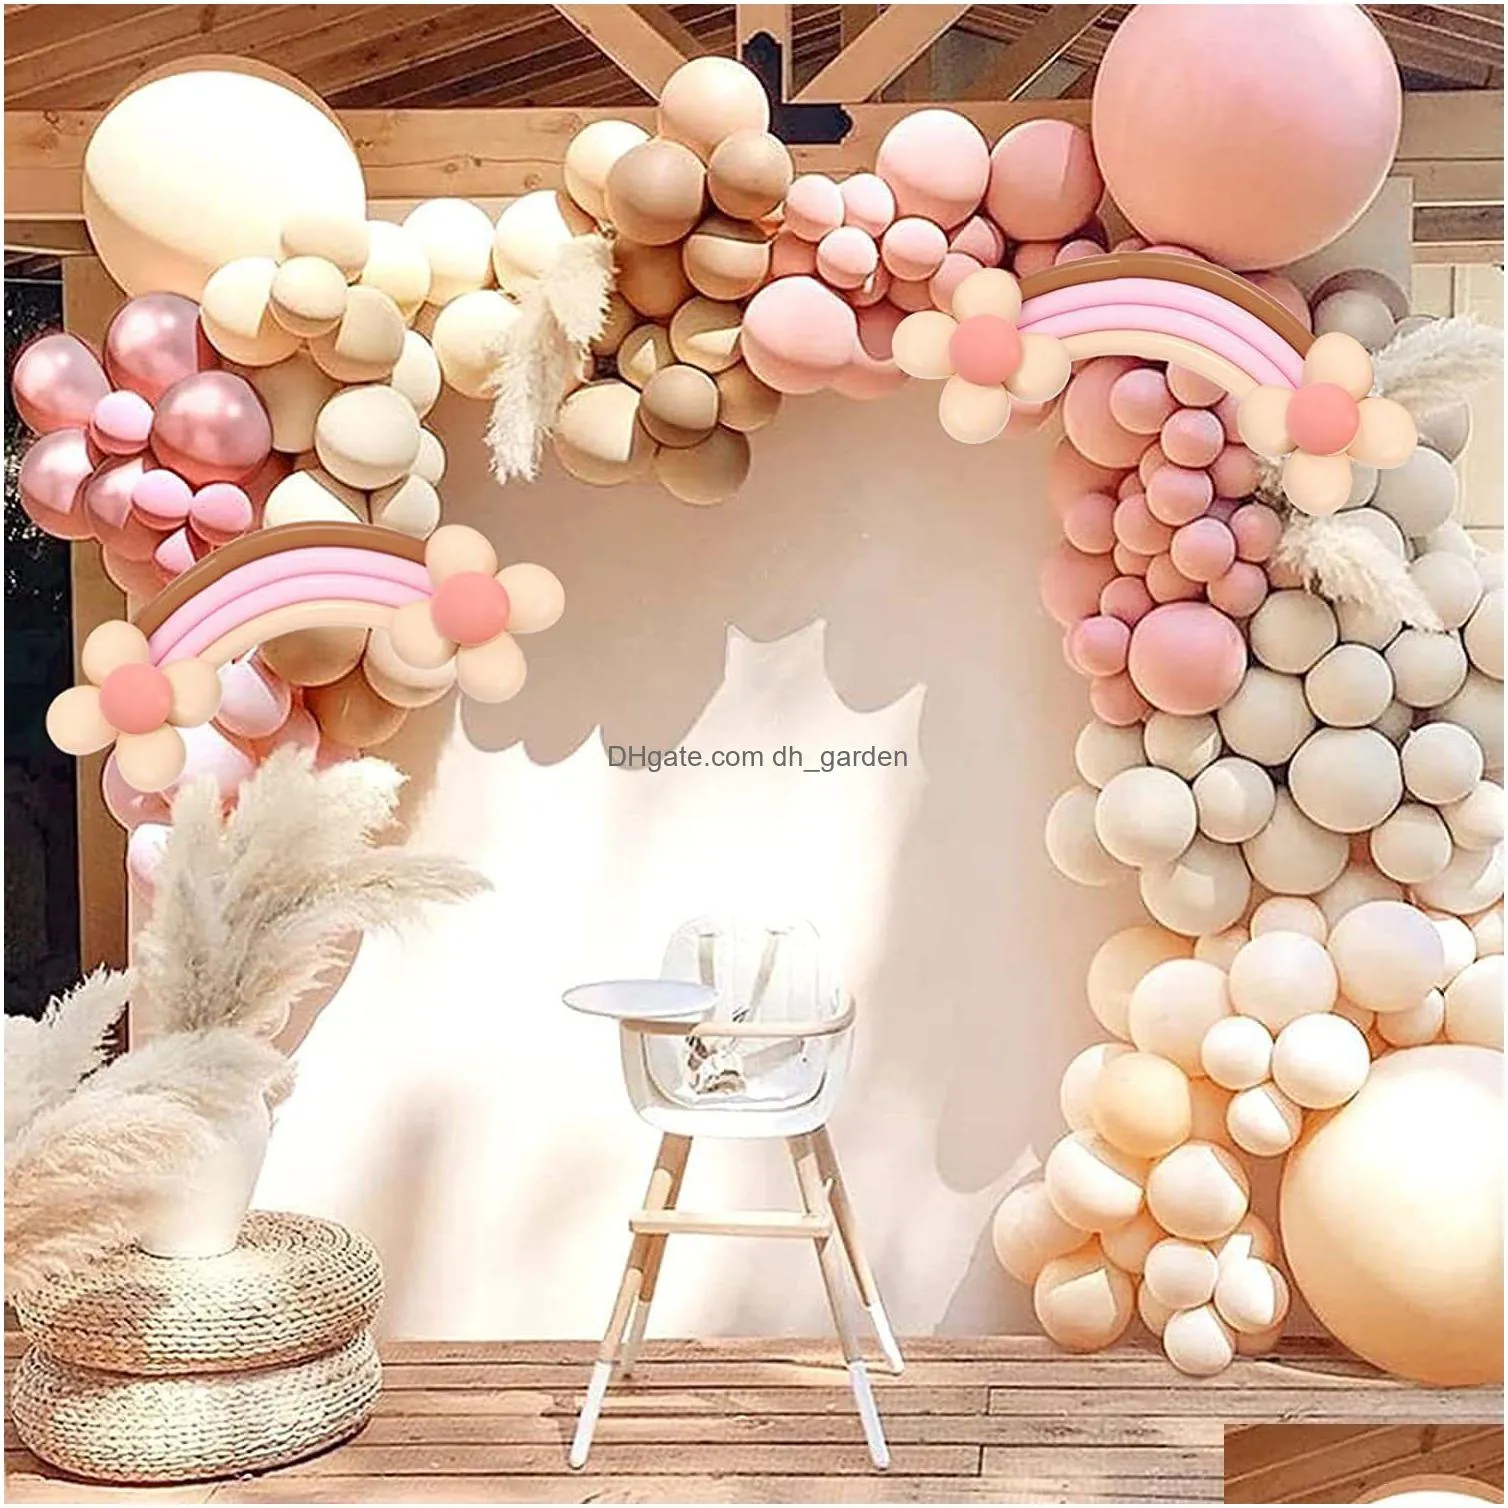 Other Event & Party Supplies Other Event Party Supplies Boho Rainbow Blush Balloons Garland Arch Kit Peach Pastel Apricot La Dhgarden Dhlzc